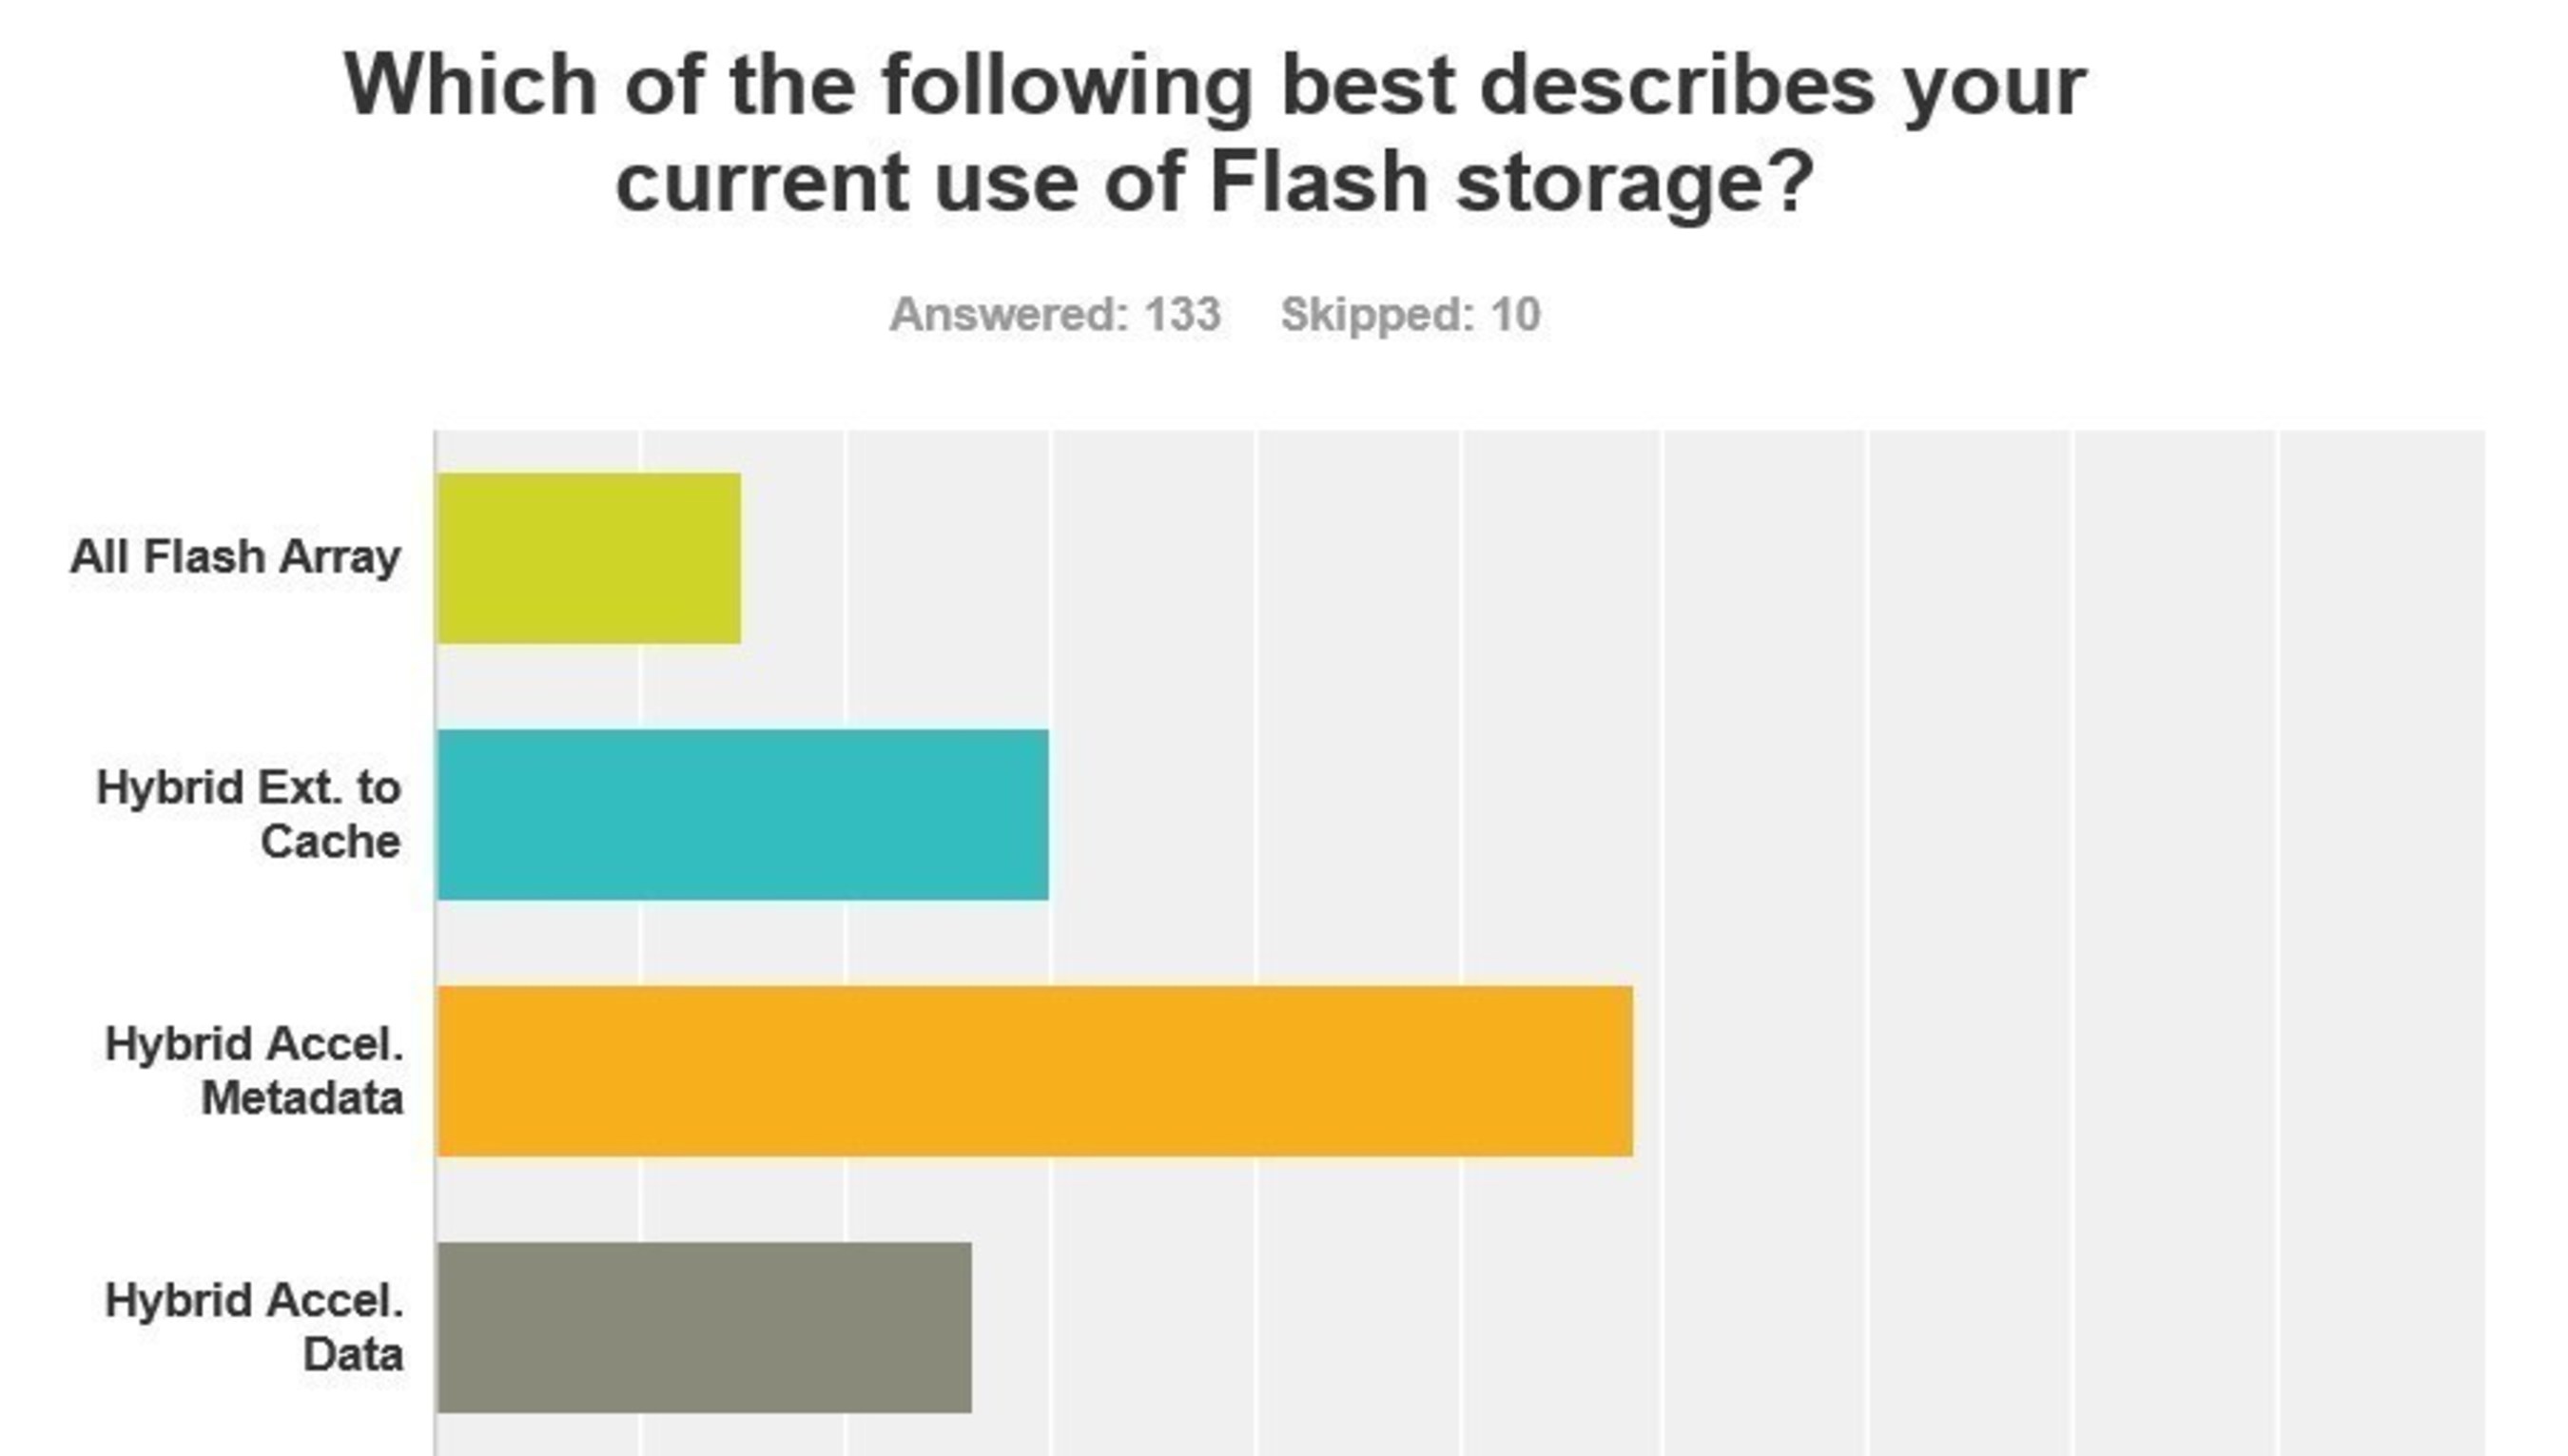 90% of High Performance Computing (HPC) Trends Survey respondents are using flash in HPC data centers with 80% using hybrid flash arrays and 10% using all-flash arrays.